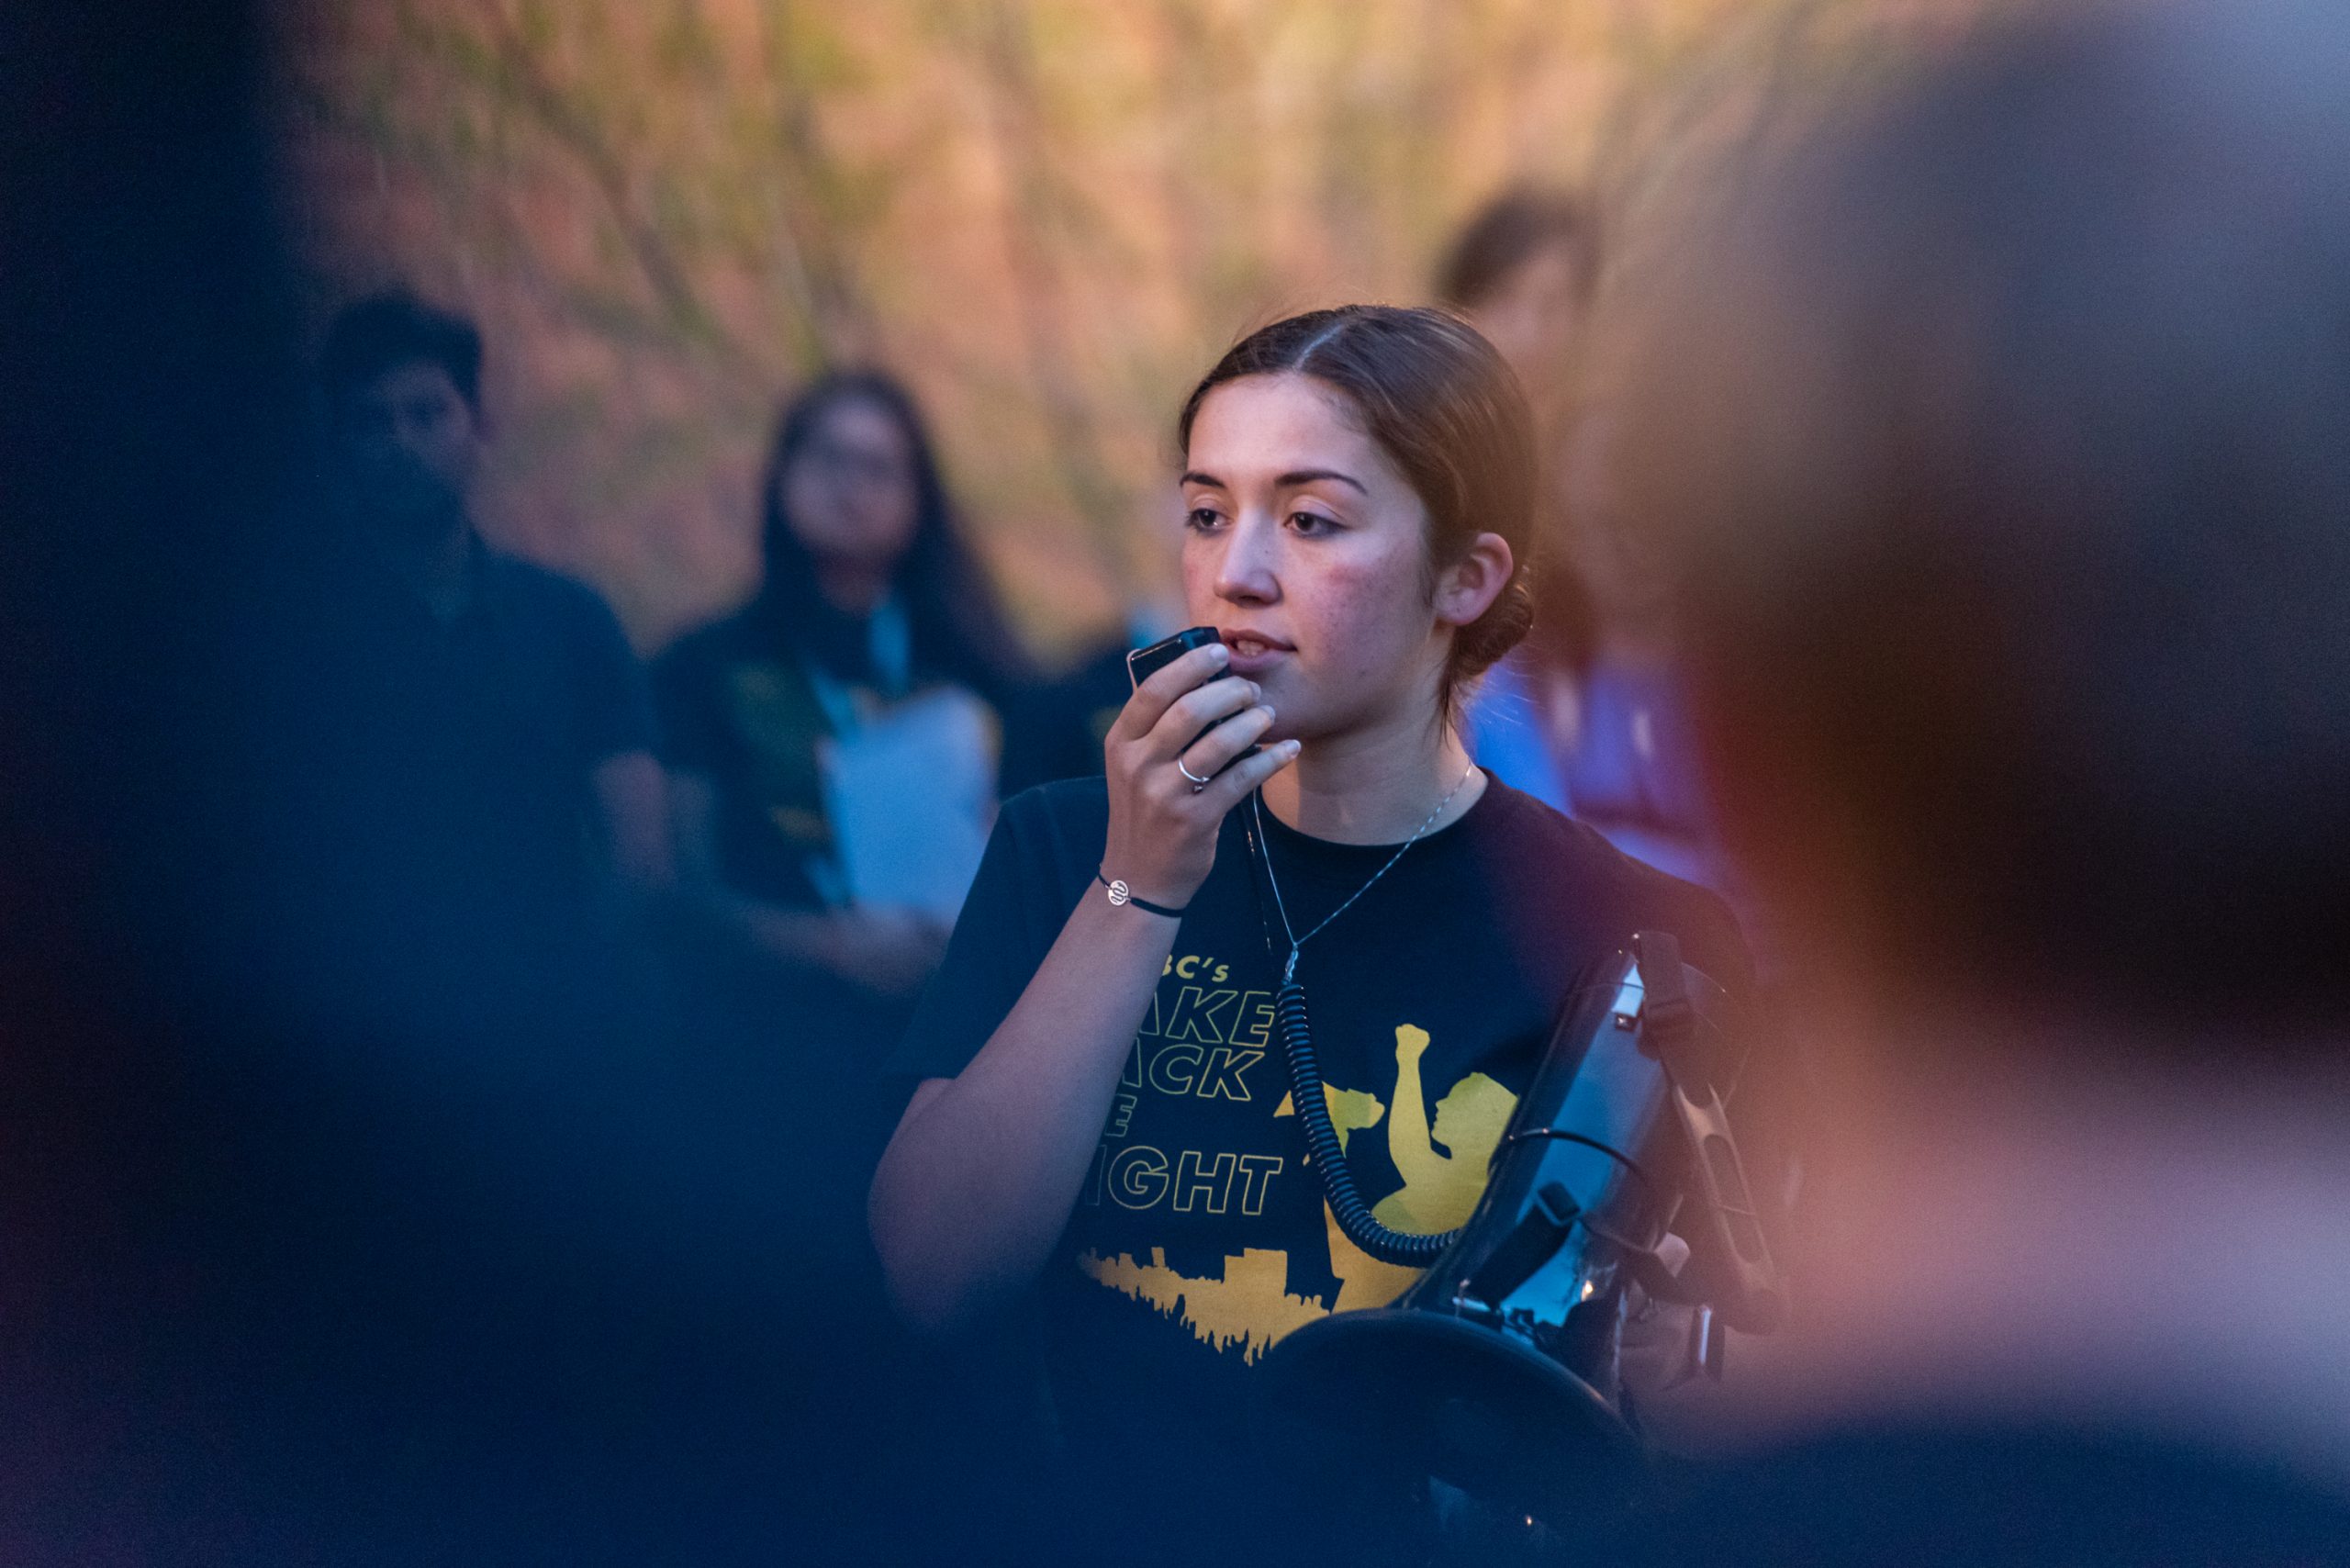 Woman wearing "Take Back the Night" t-shirt speaks into a microphone at the center of a group.